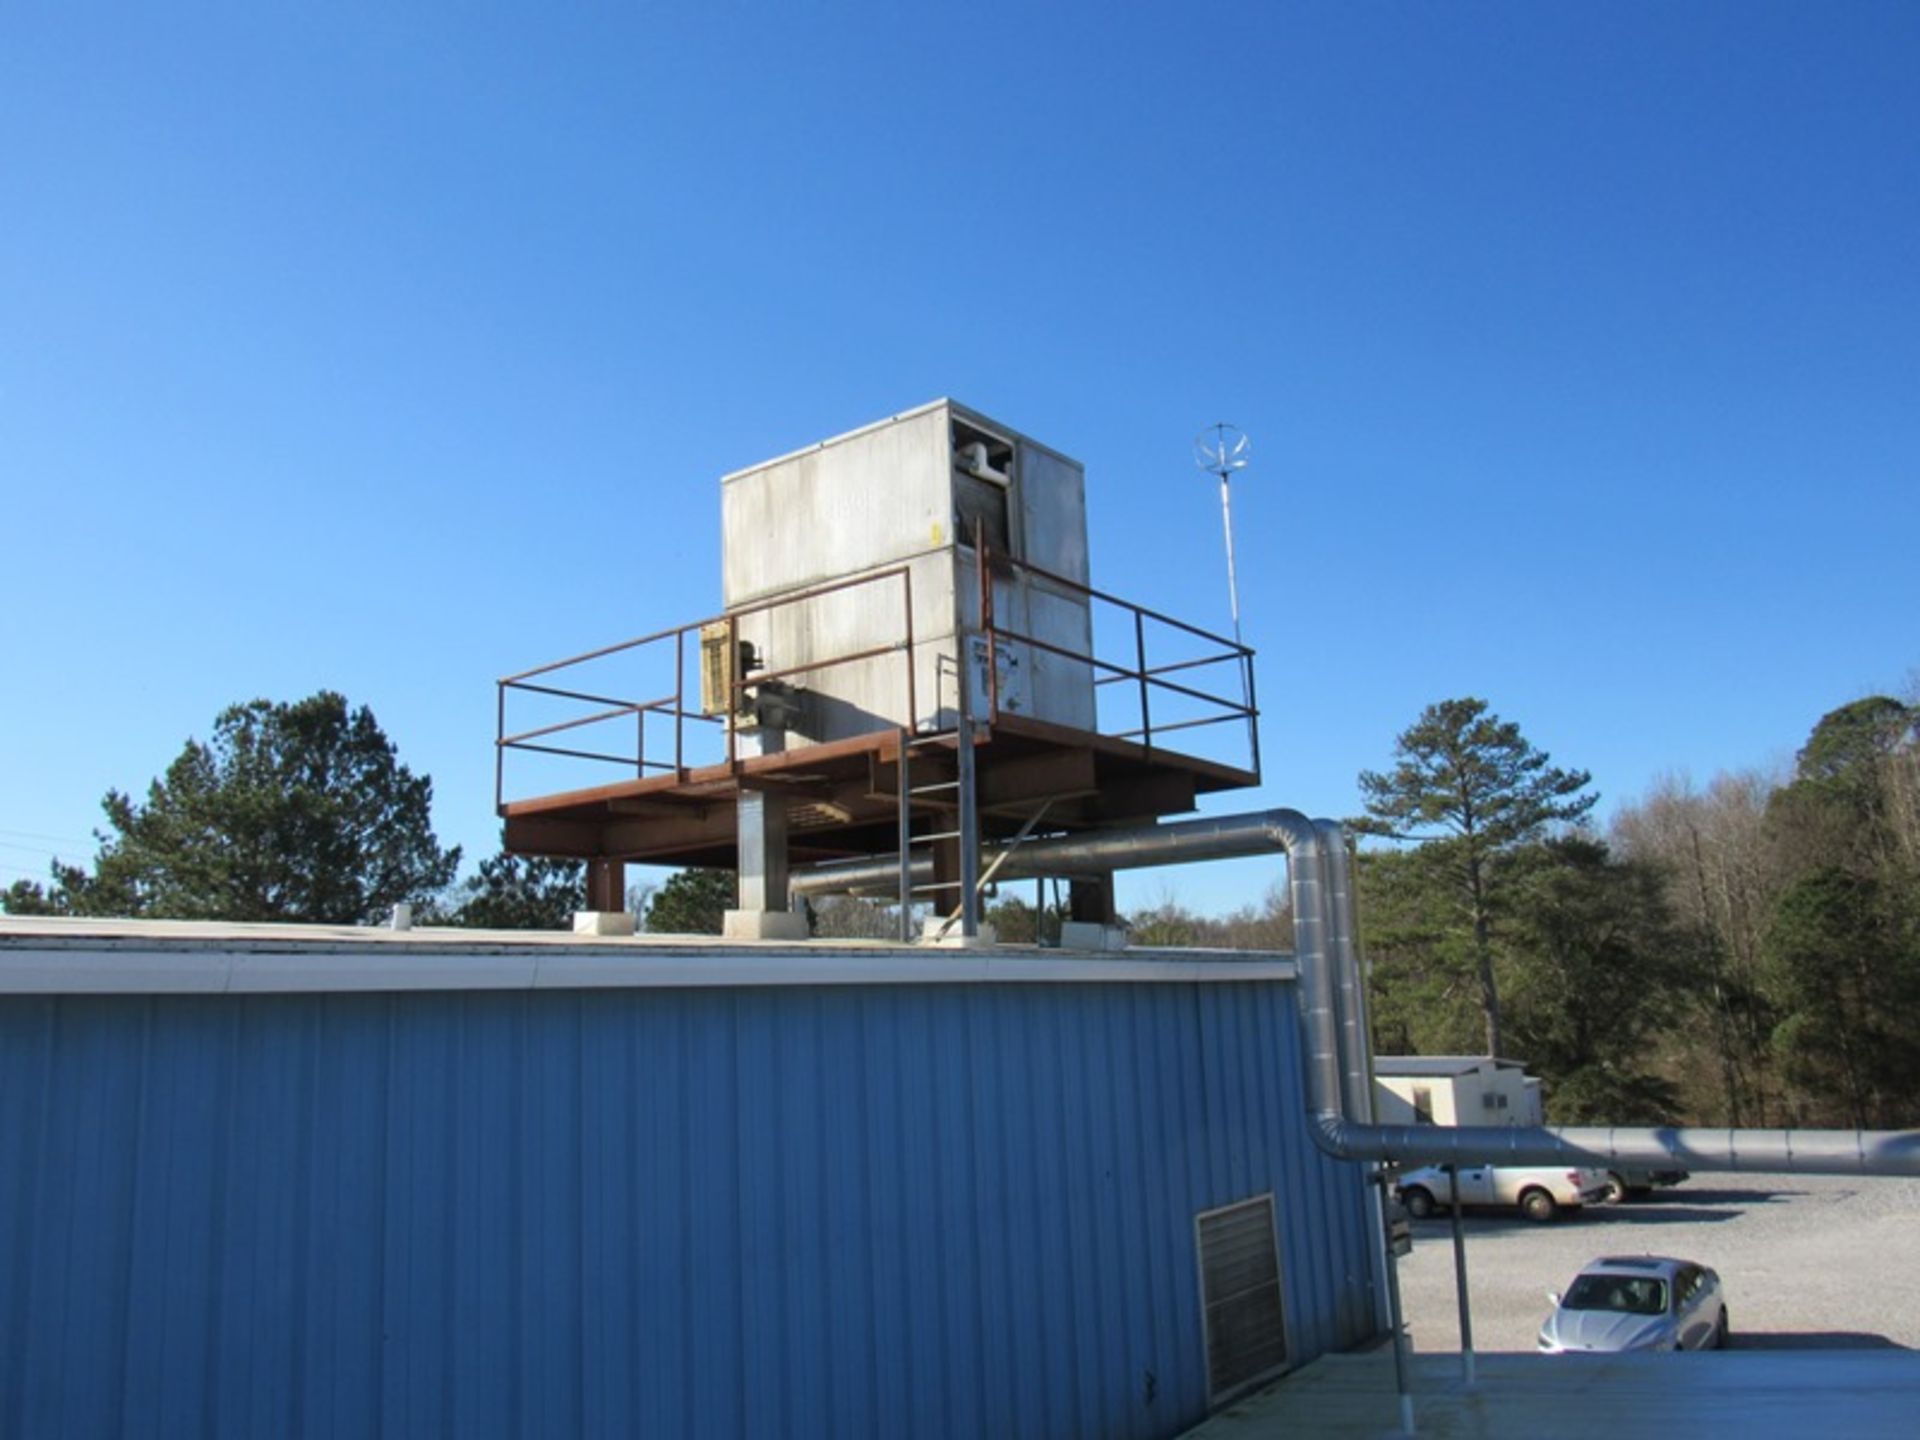 Turbo Mdl. Tigar 36-20 Ammonia Plate Chiller, Ser. #E022030, on roof top structure, 21 plates in - Image 8 of 9